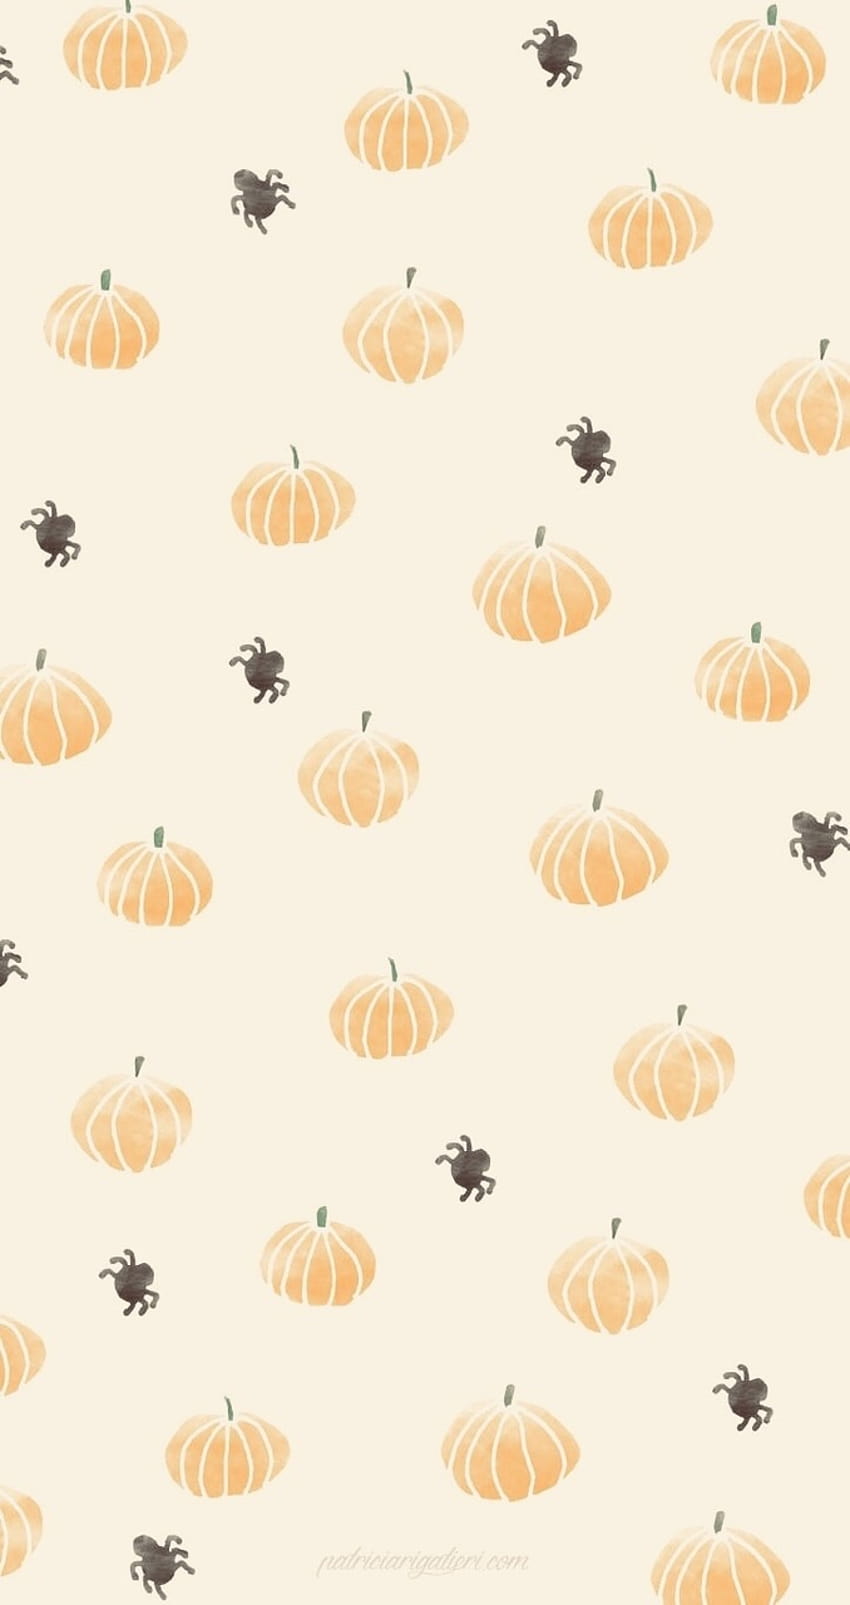 A cute Halloween phone background with pumpkins and spiders - Halloween